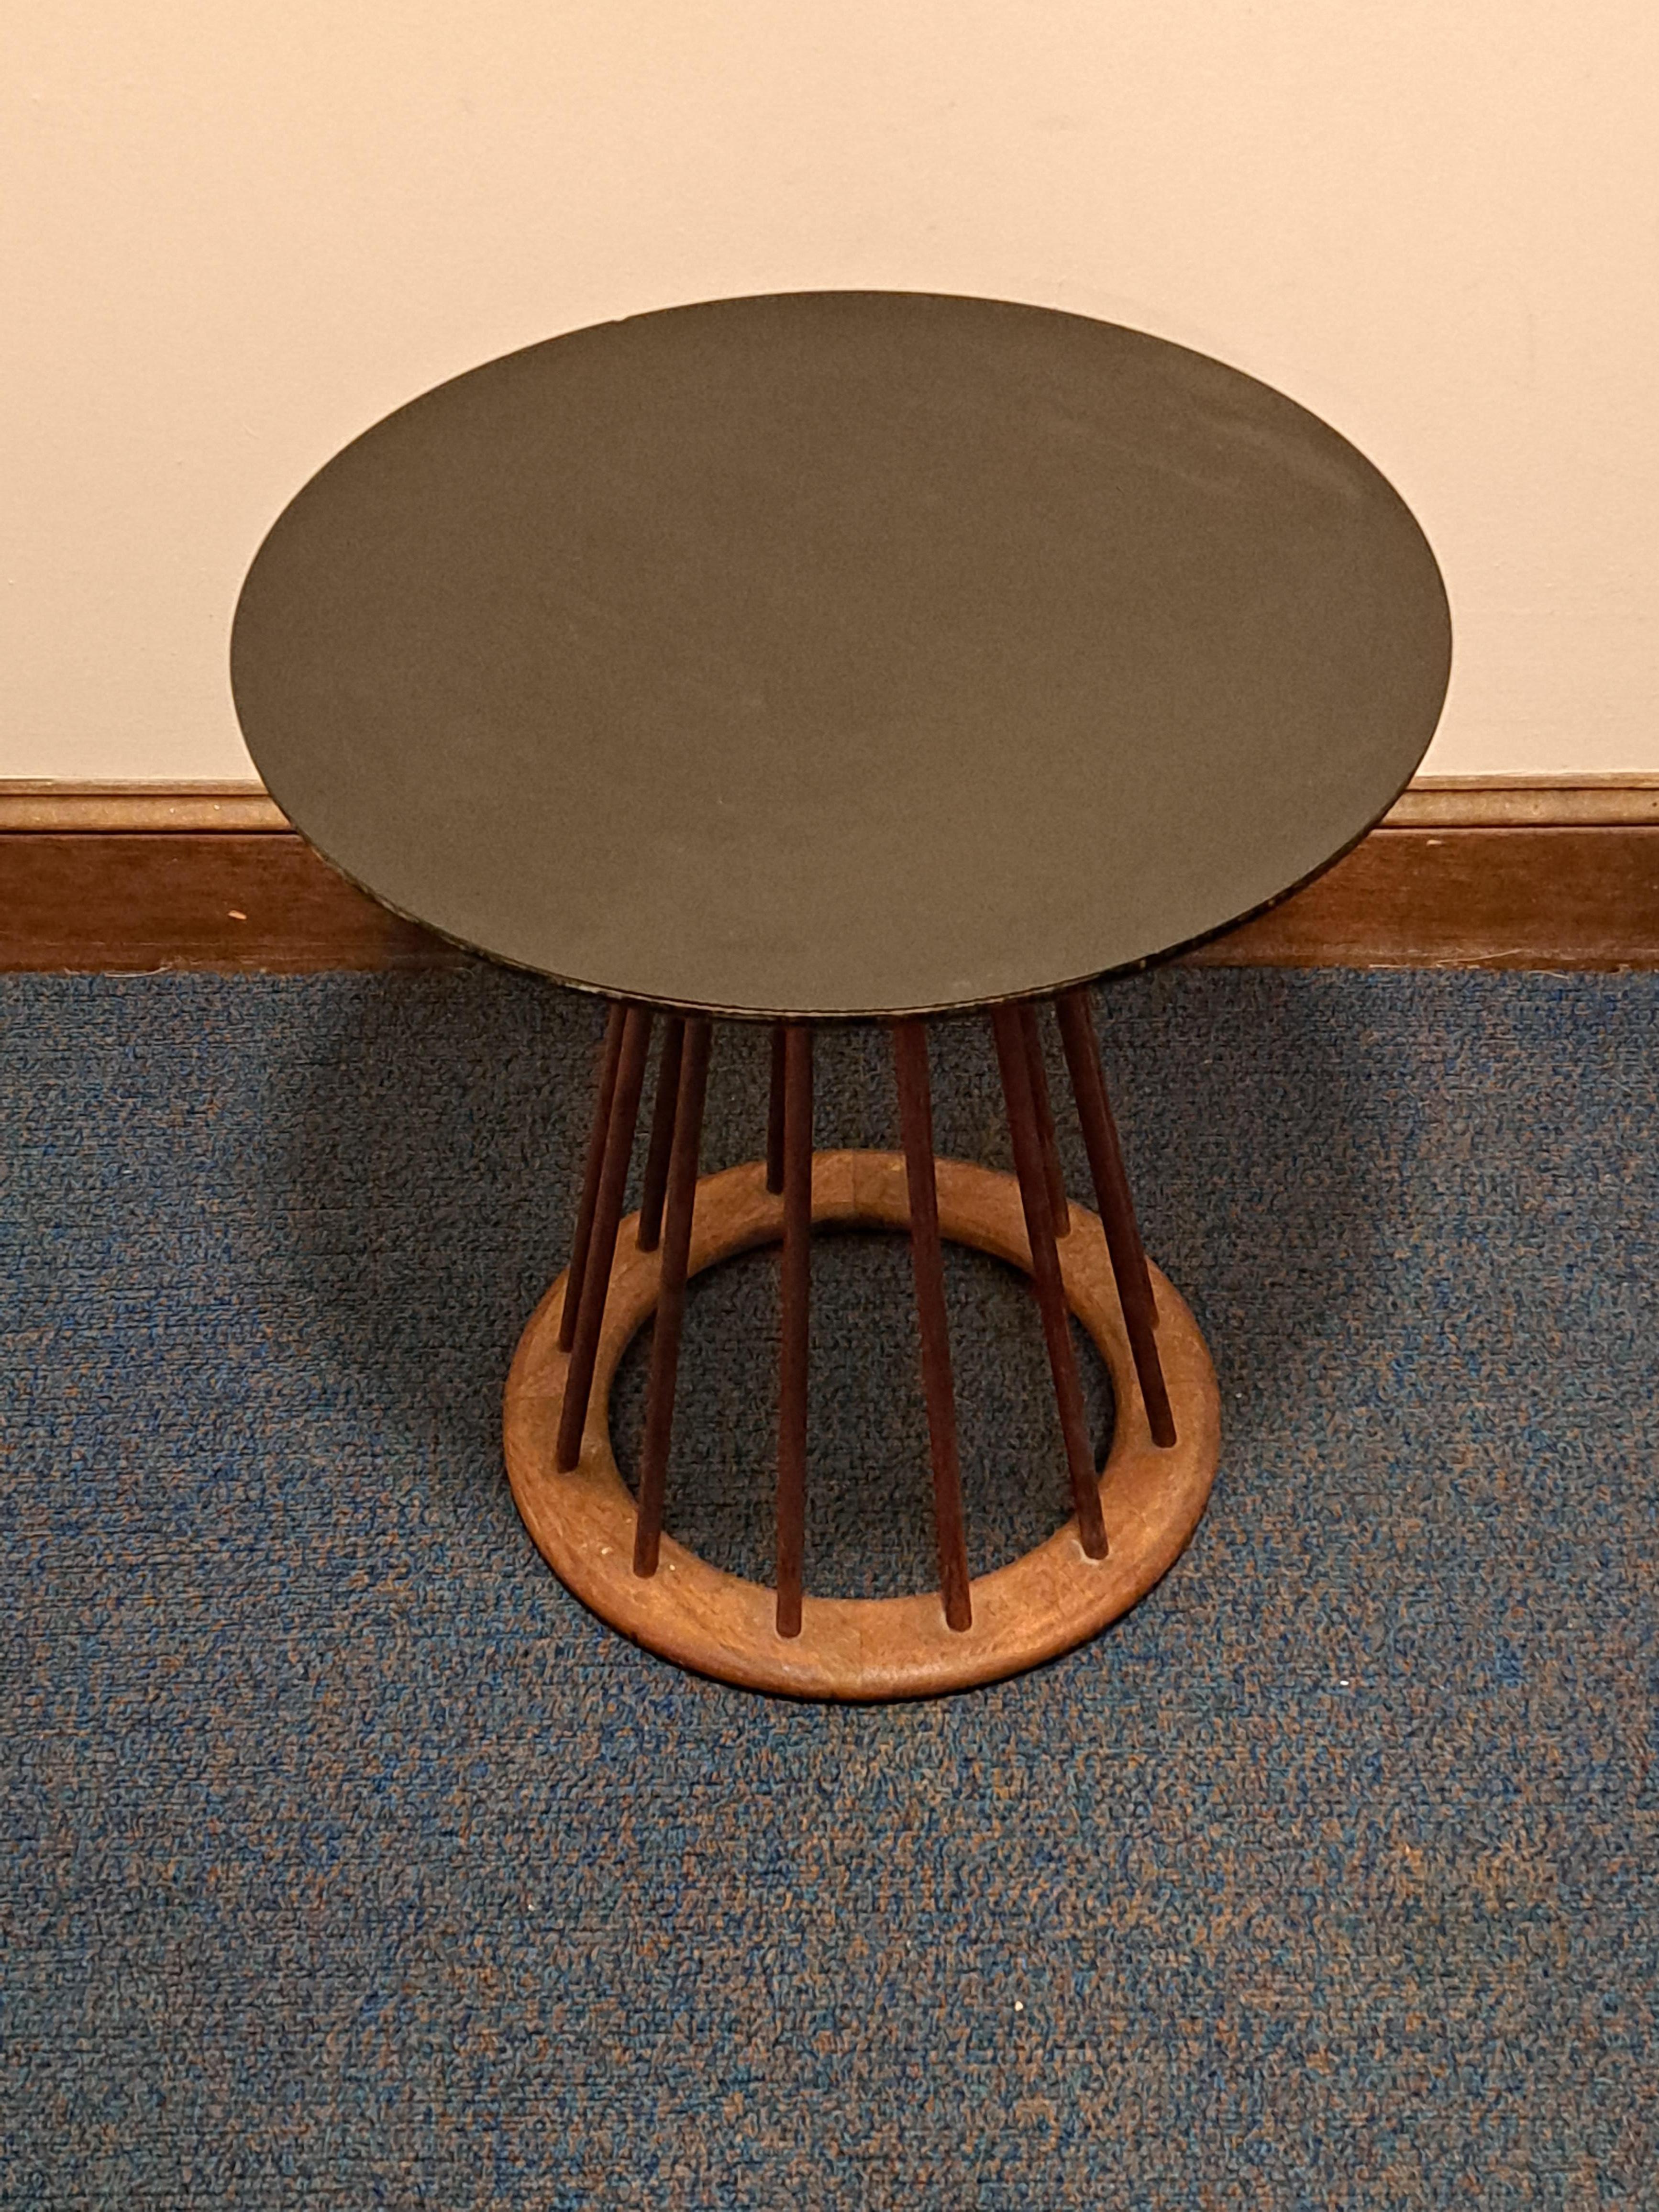 Side/end table with spindles and black laminated top. Table is designed by Arthur Umanoff of walnut wood. Table has circular base with narrow wooden spindles that meet at the table top.